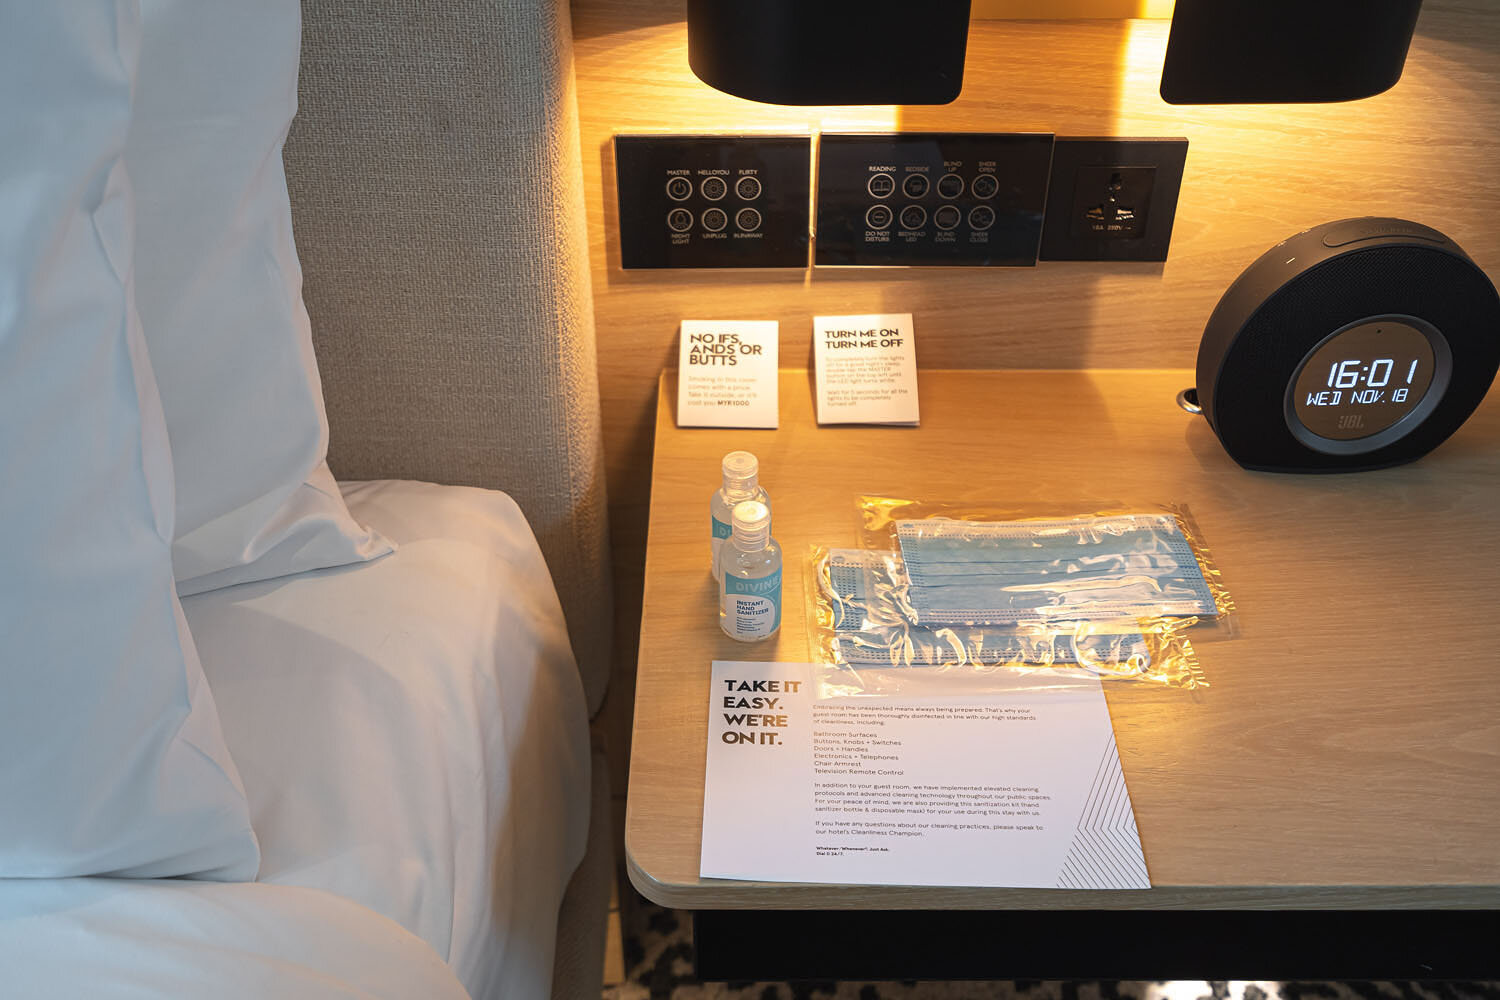  Masks, hand sanitisers and lighting controls near the bed 